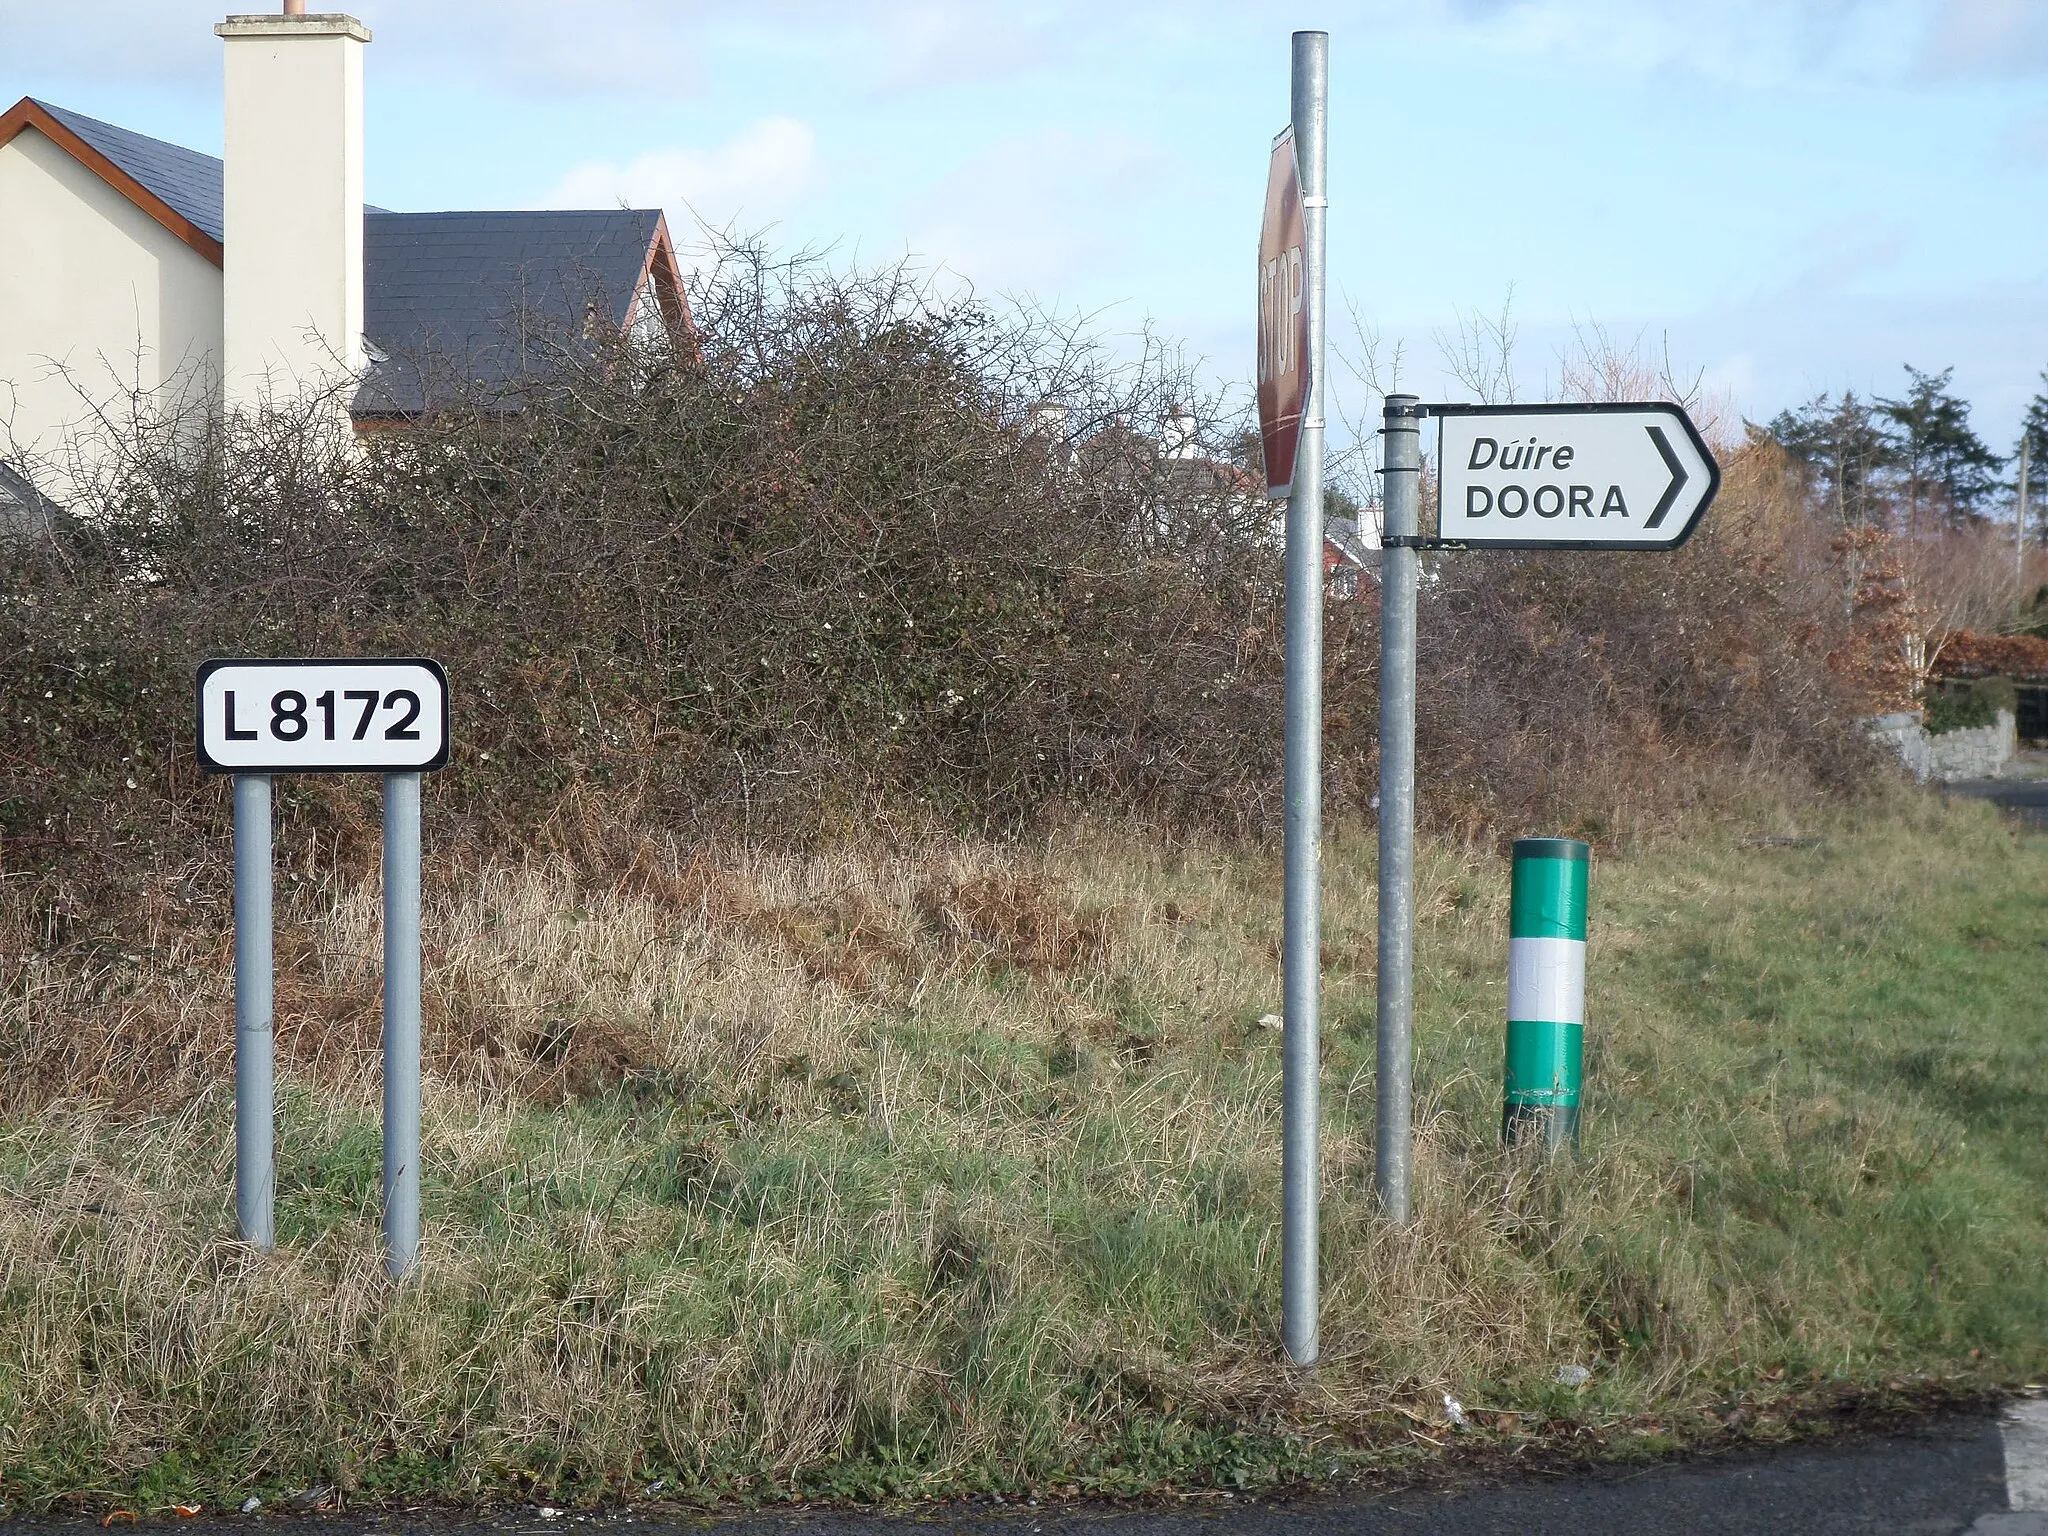 Photo showing: A sign post pointing to Doora